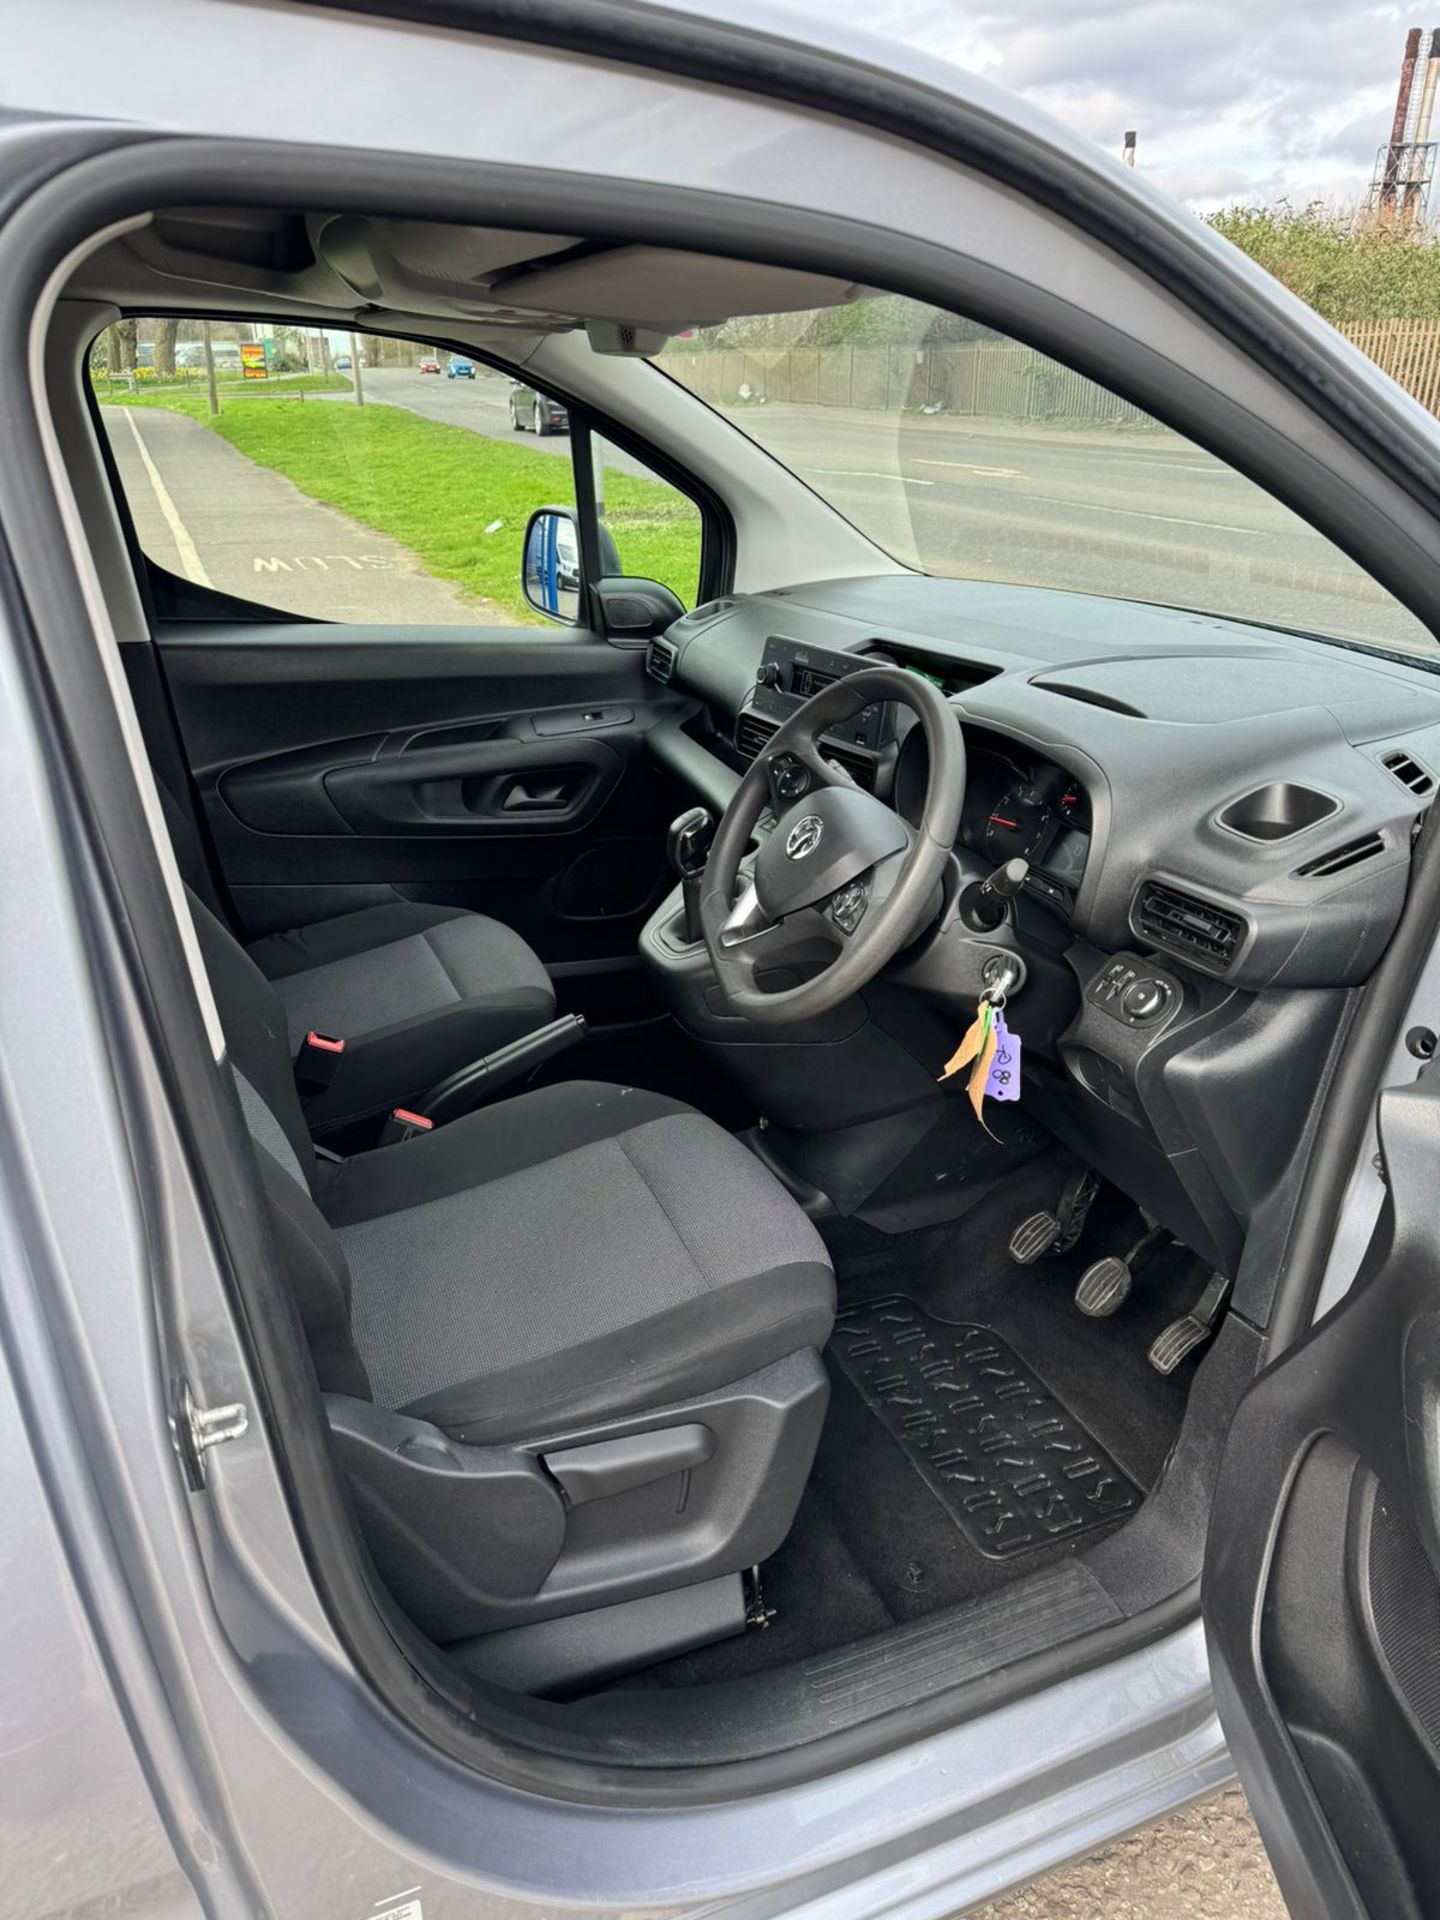 2020 20 VAUXHALL COMBO SPORTIVE PANEL VAN - 51K MILES - PLY LINED - AIR CON. - Image 6 of 11